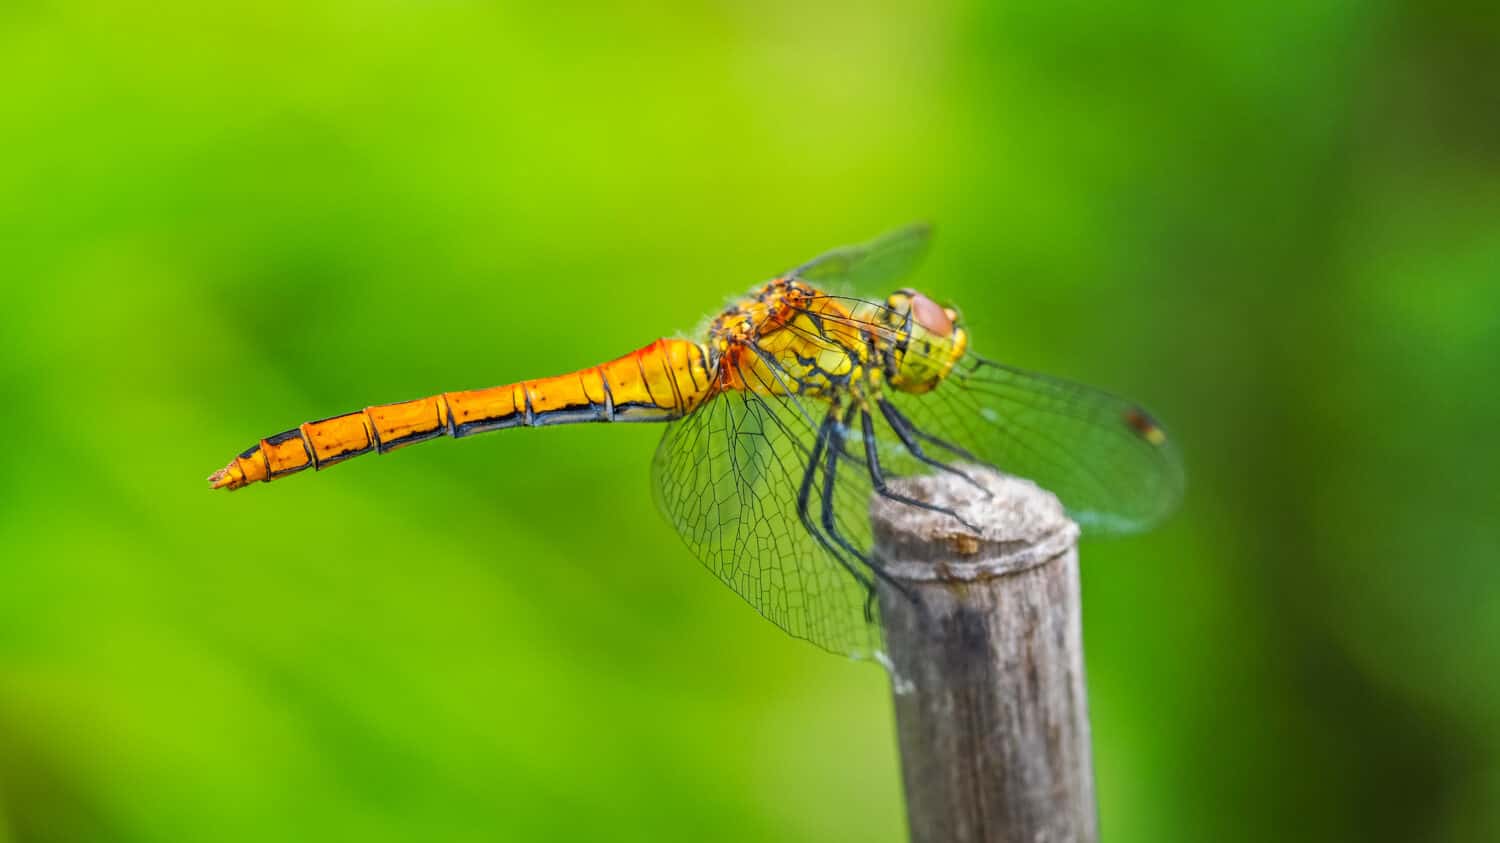 Macro photography. Beautiful yellow-orange insect with wings on a green background close up. It is female dragonfly Macrodiplax cora. Macrodiplax is a genus of dragonflies in the family Libellulidae.